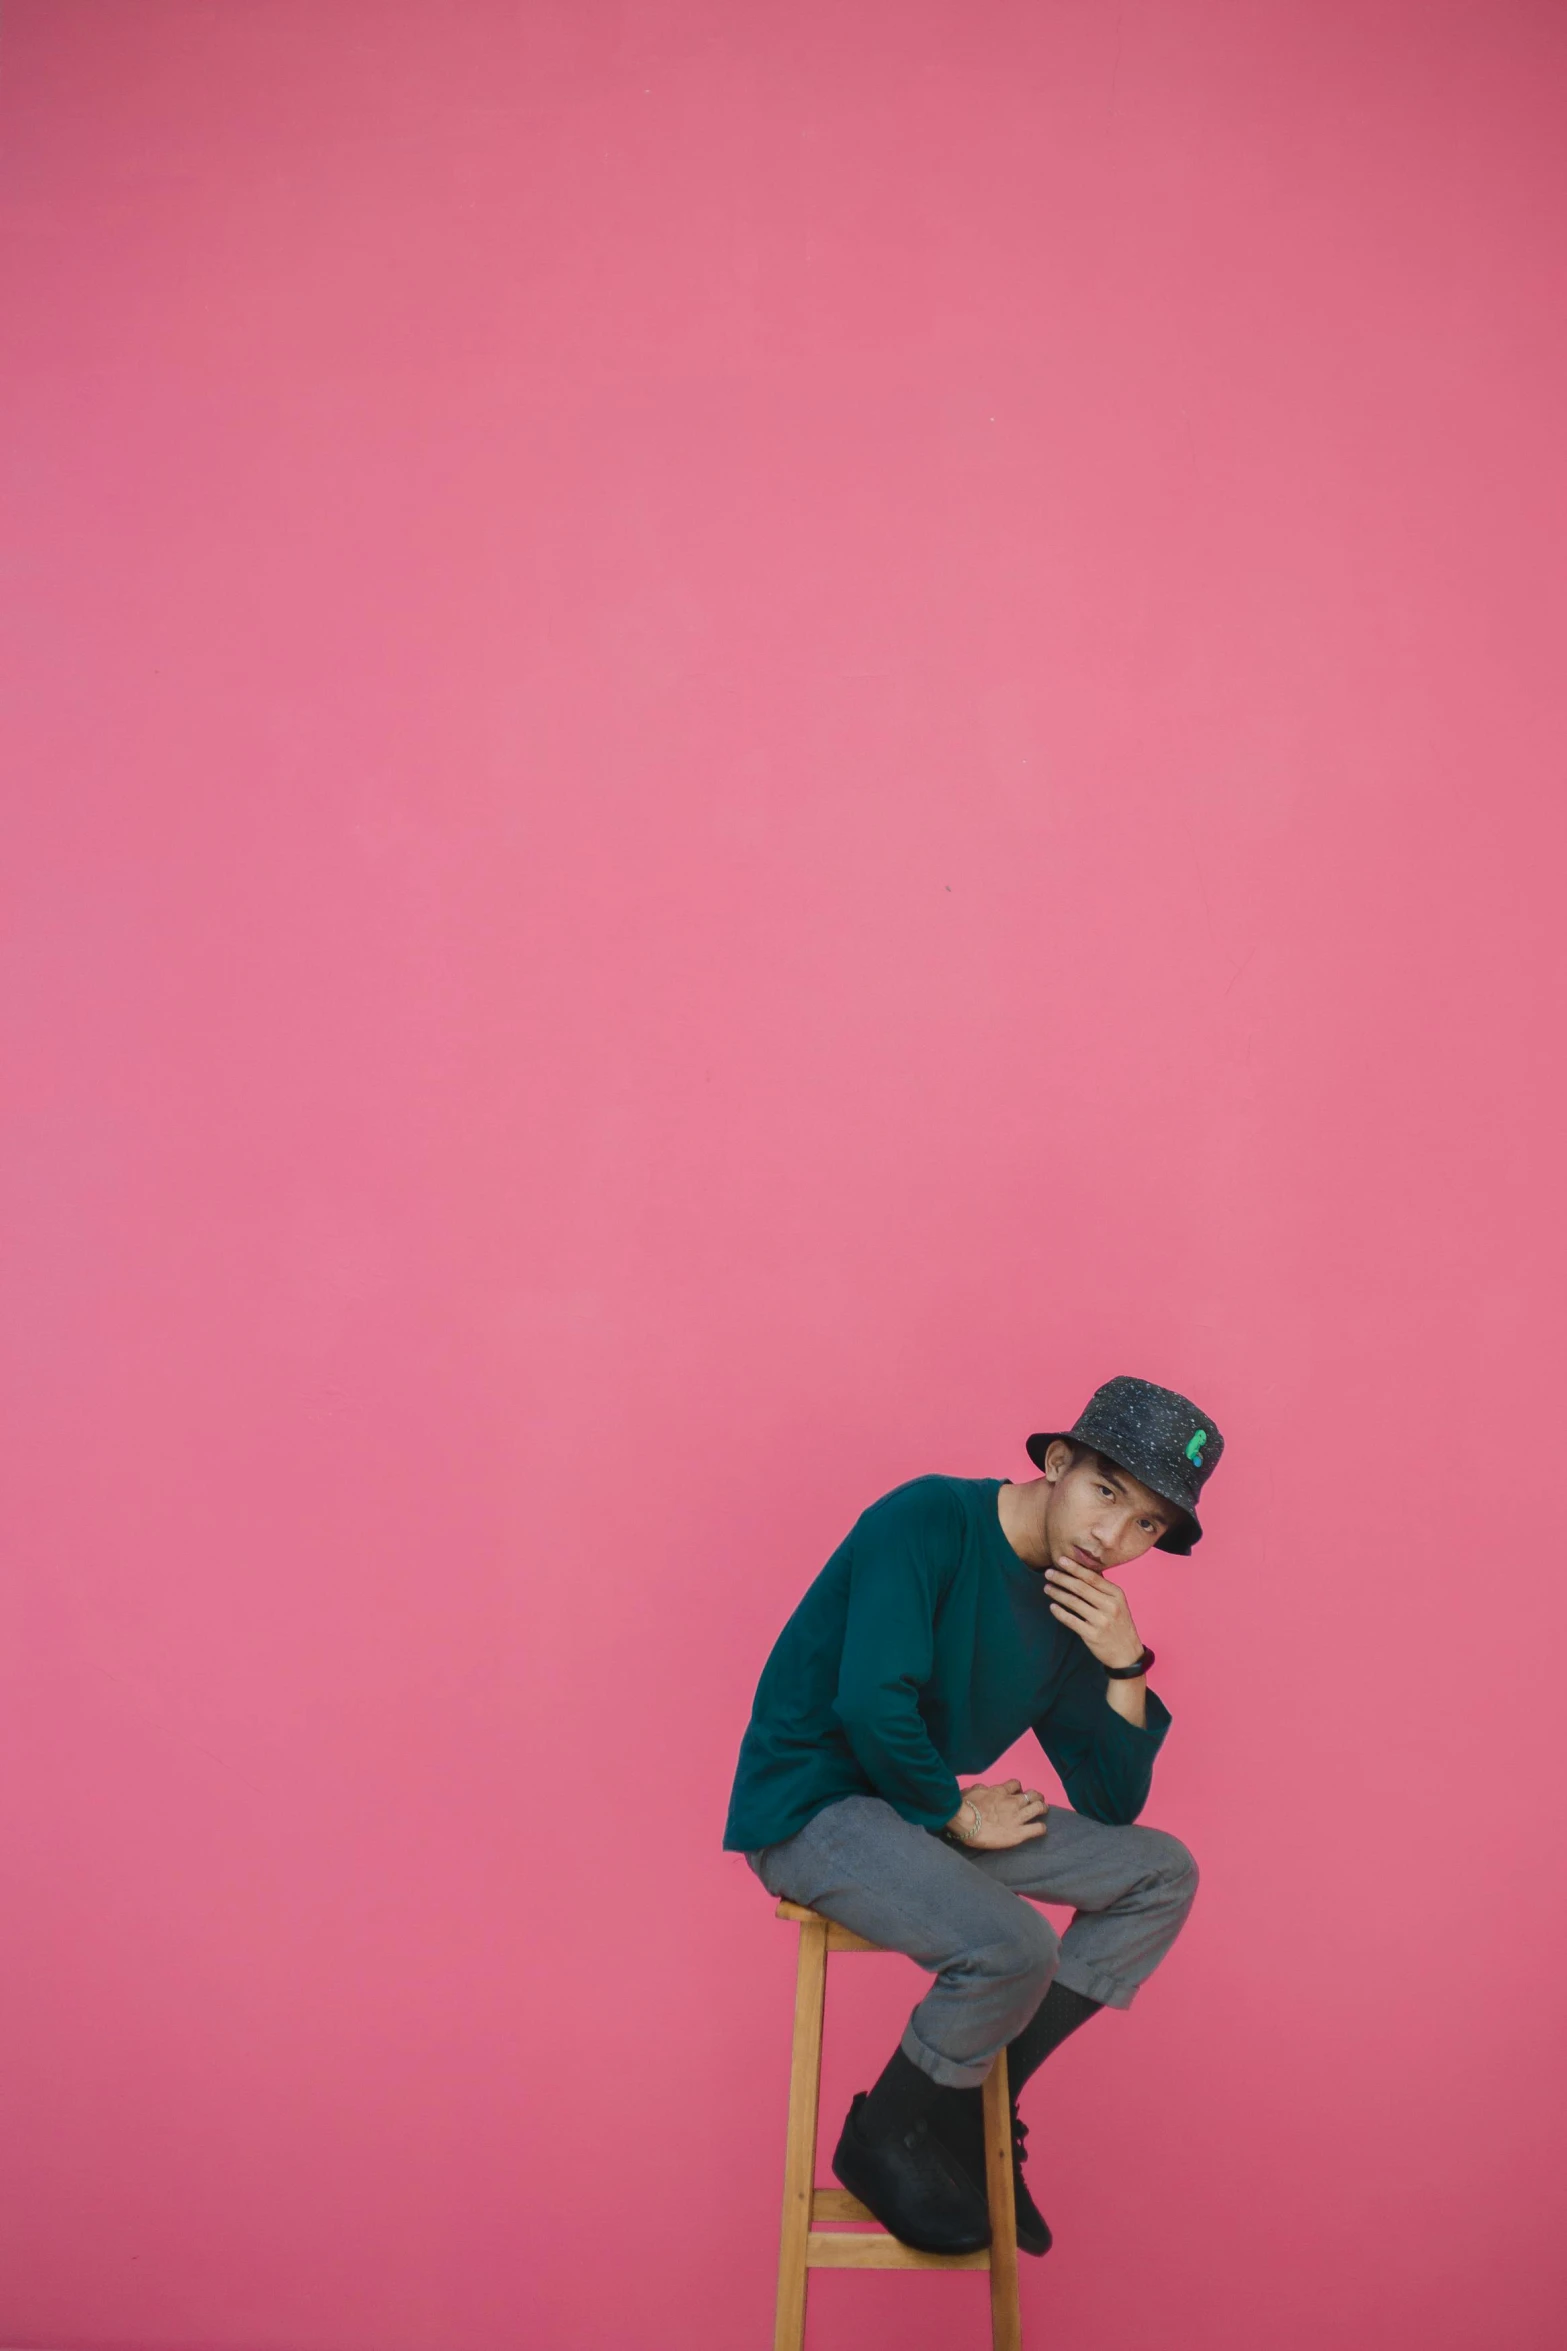 a man sitting on a stool in front of a pink wall, inspired by Junpei Satoh, trending on unsplash, minimalism, he is wearing a hat, thinker pose, full frame image, concert